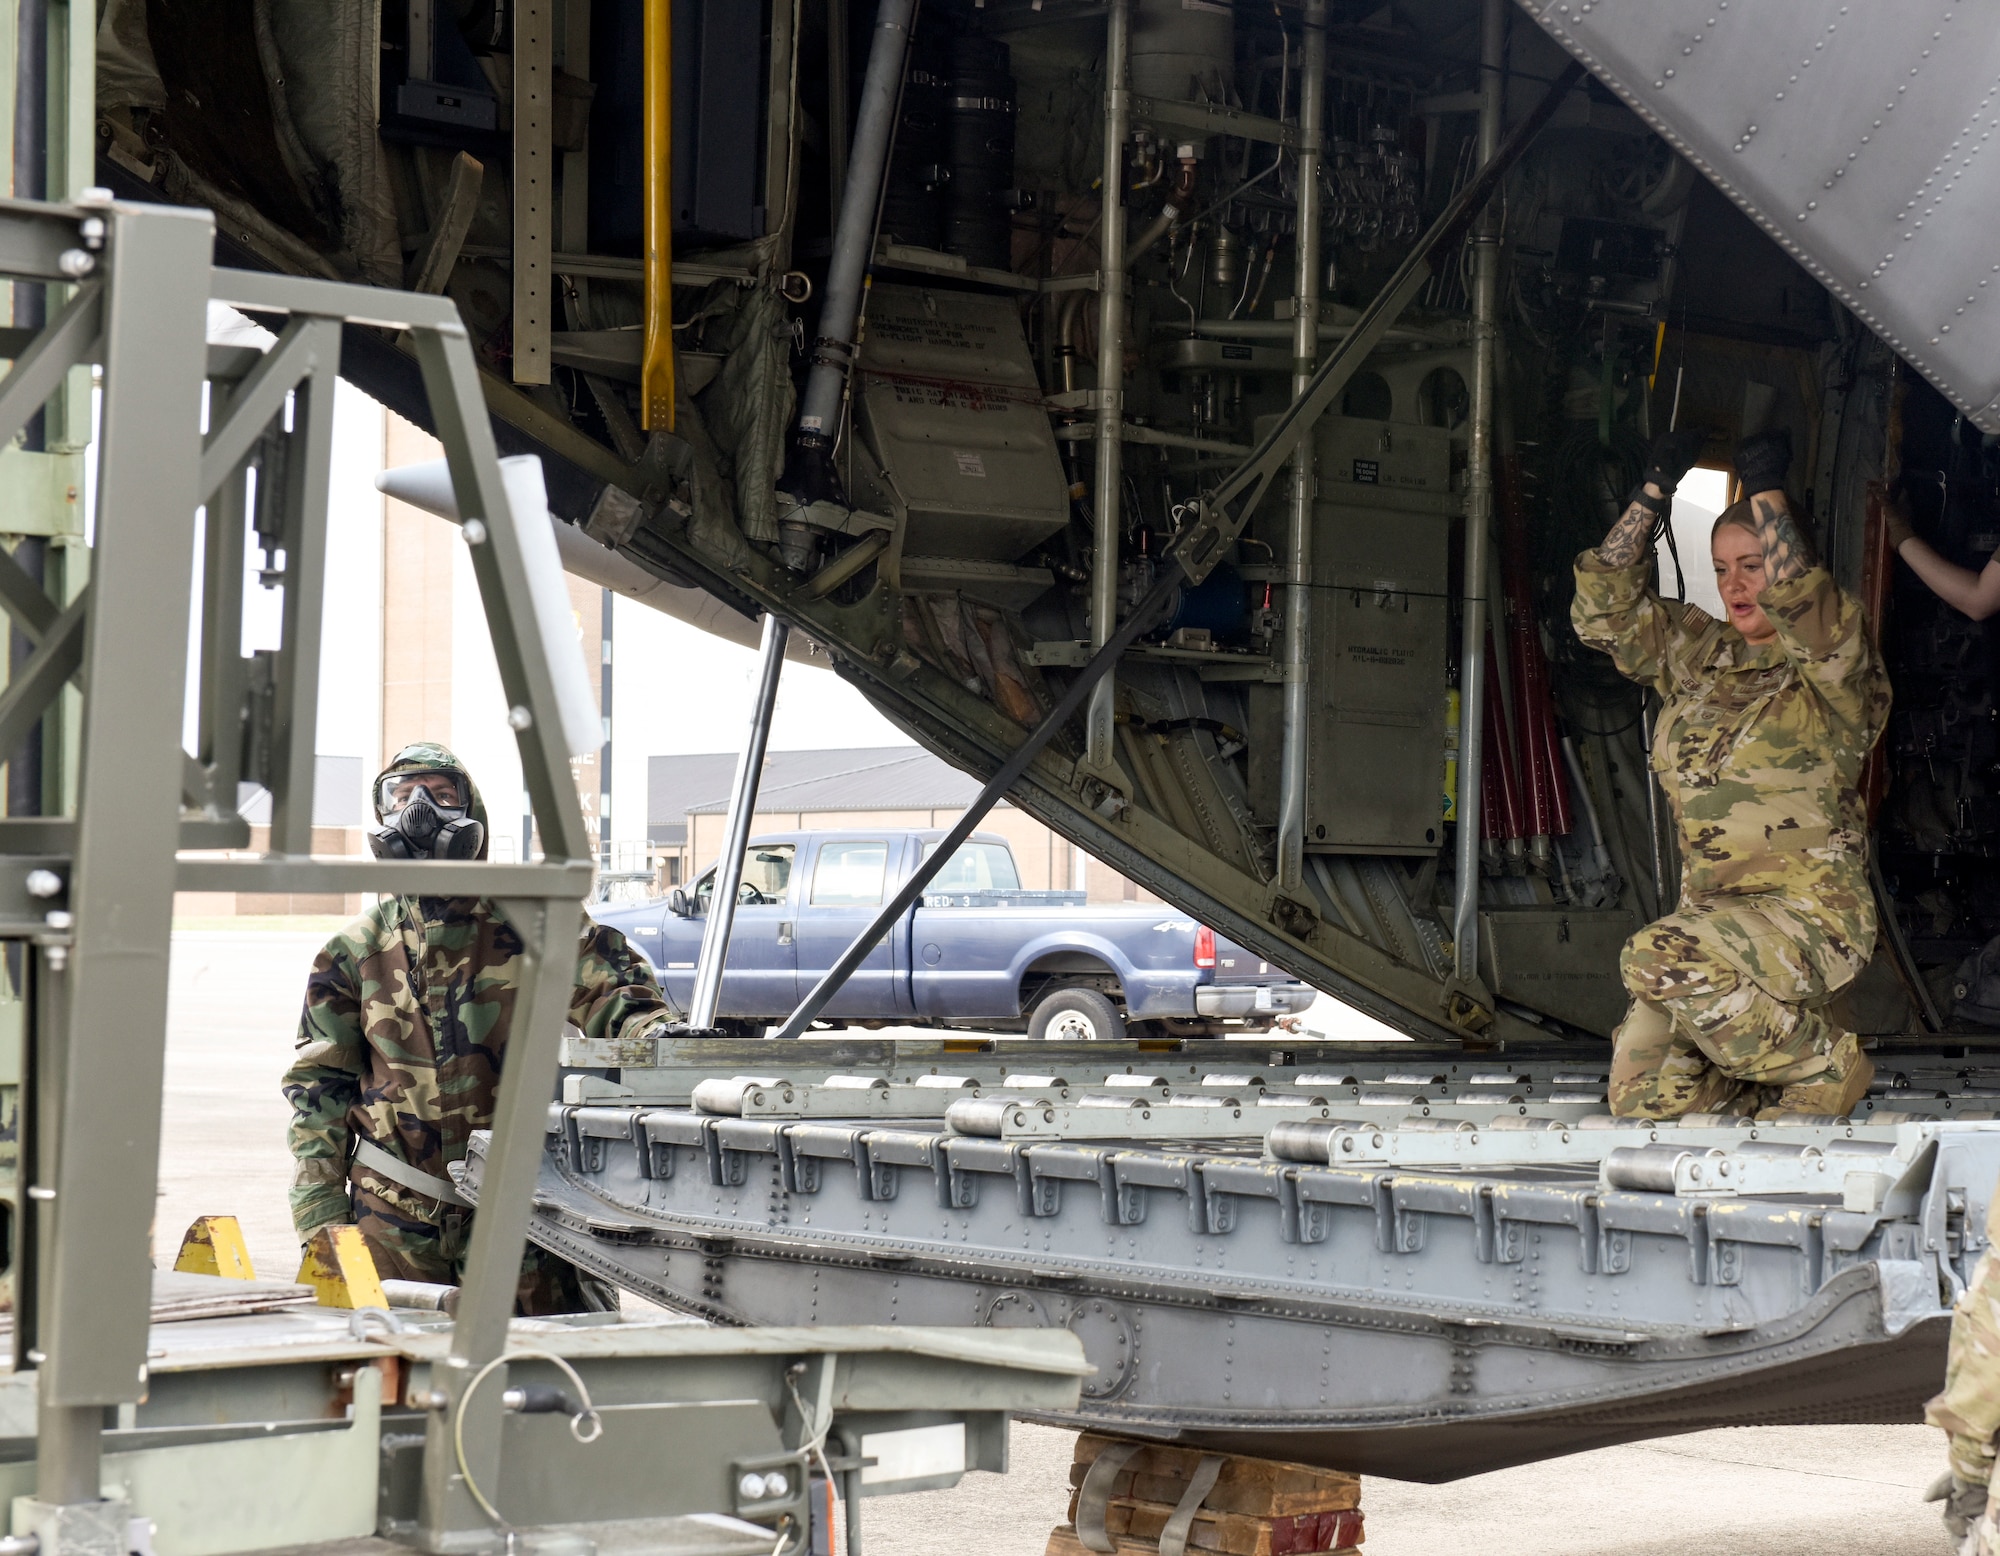 A loadmaster guides the K-loader to the ramp of a C-130H Hercules aircraft during the aerial port training event on June 5, 2021 at Little Rock Air Force Base, Arkansas. The ‘Port Dawgs’ from the 189th Aerial Port Flight, Air National Guard, and from the 96th Aerial Port Squadron, Air Force Reserve, created training focused on testing aerial port operations. (U.S. Air Force photo by Tech. Sgt. James Phillips)